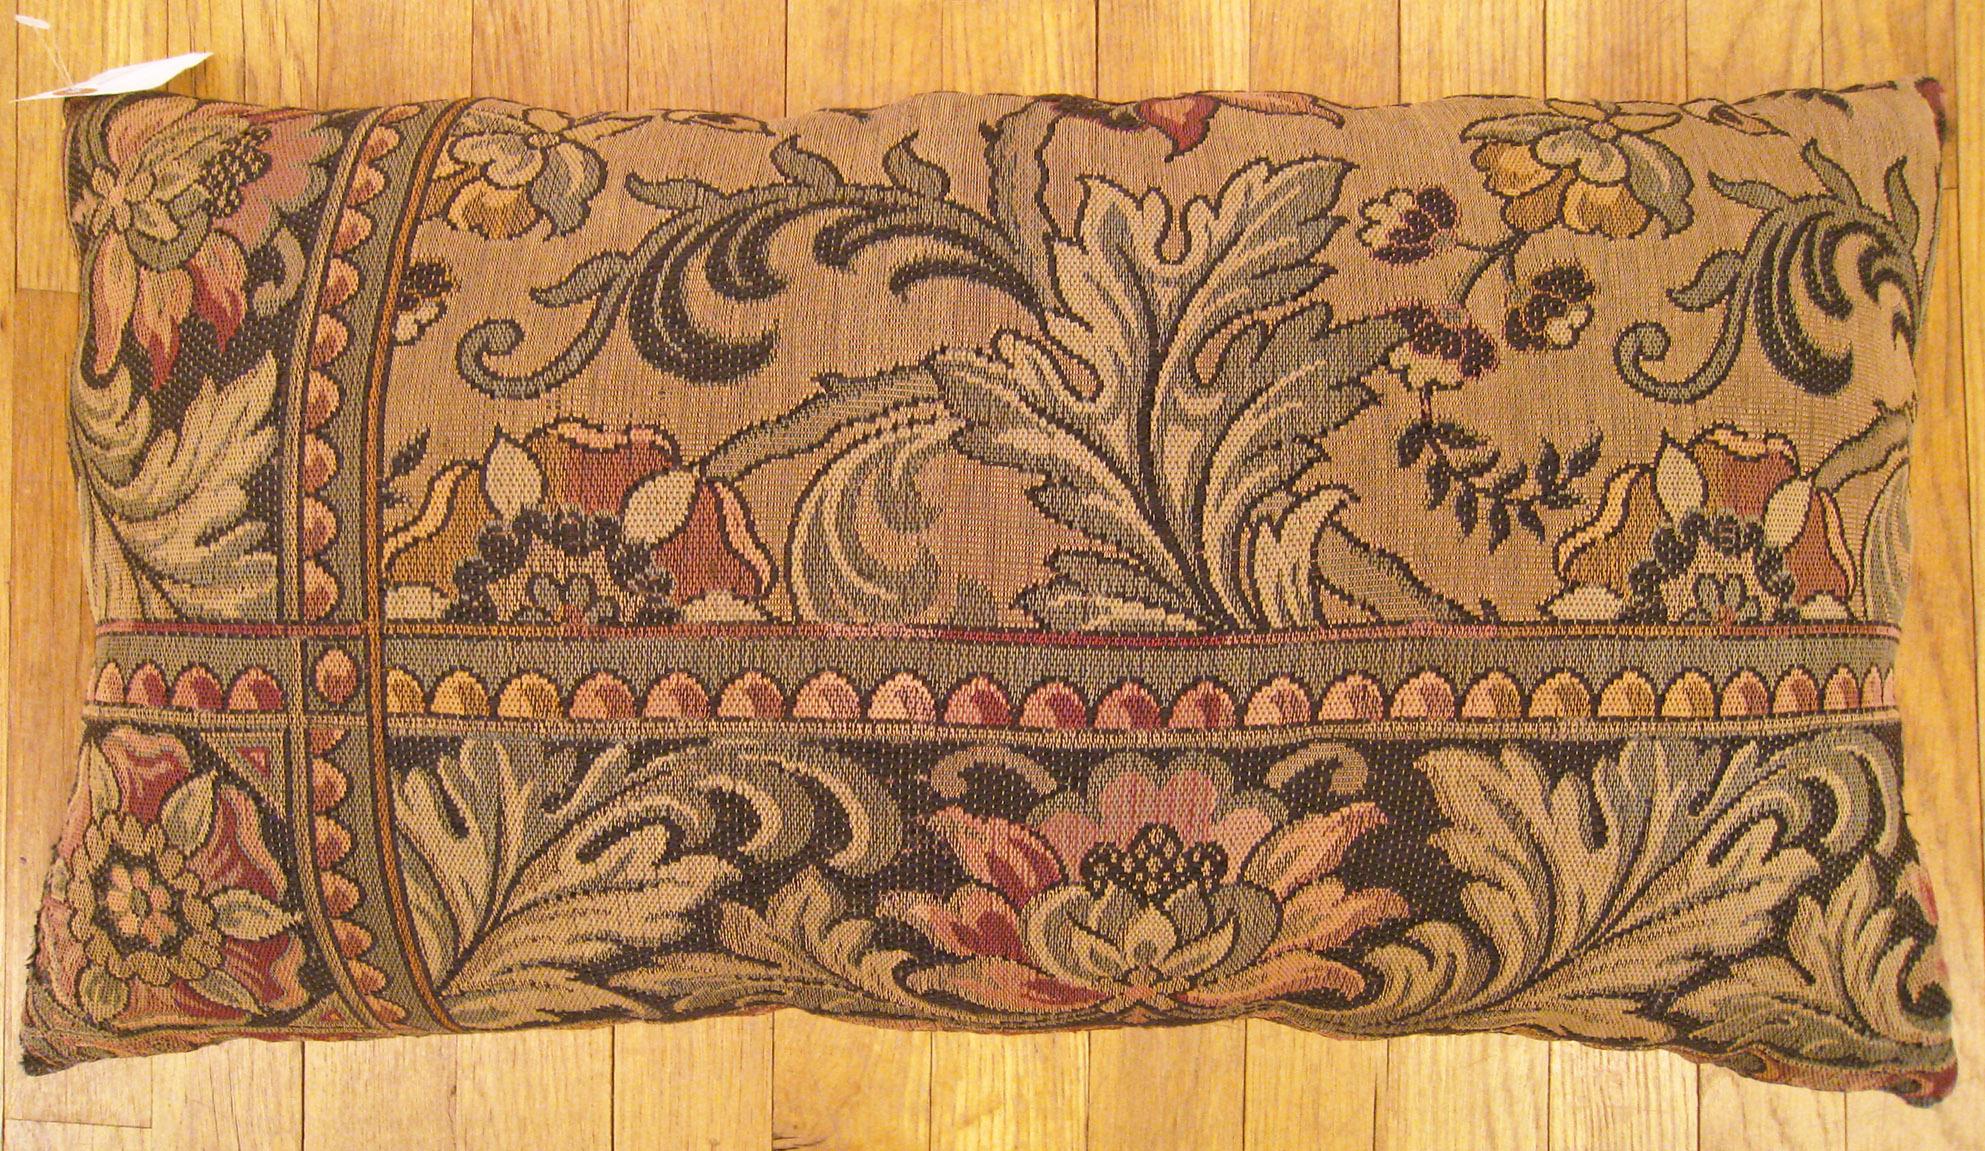 Antique Jacquard Tapestry Pillow; size 1'3” x 2'2”.

An antique decorative pillow with floral elements allover a brown central field, size 1'3